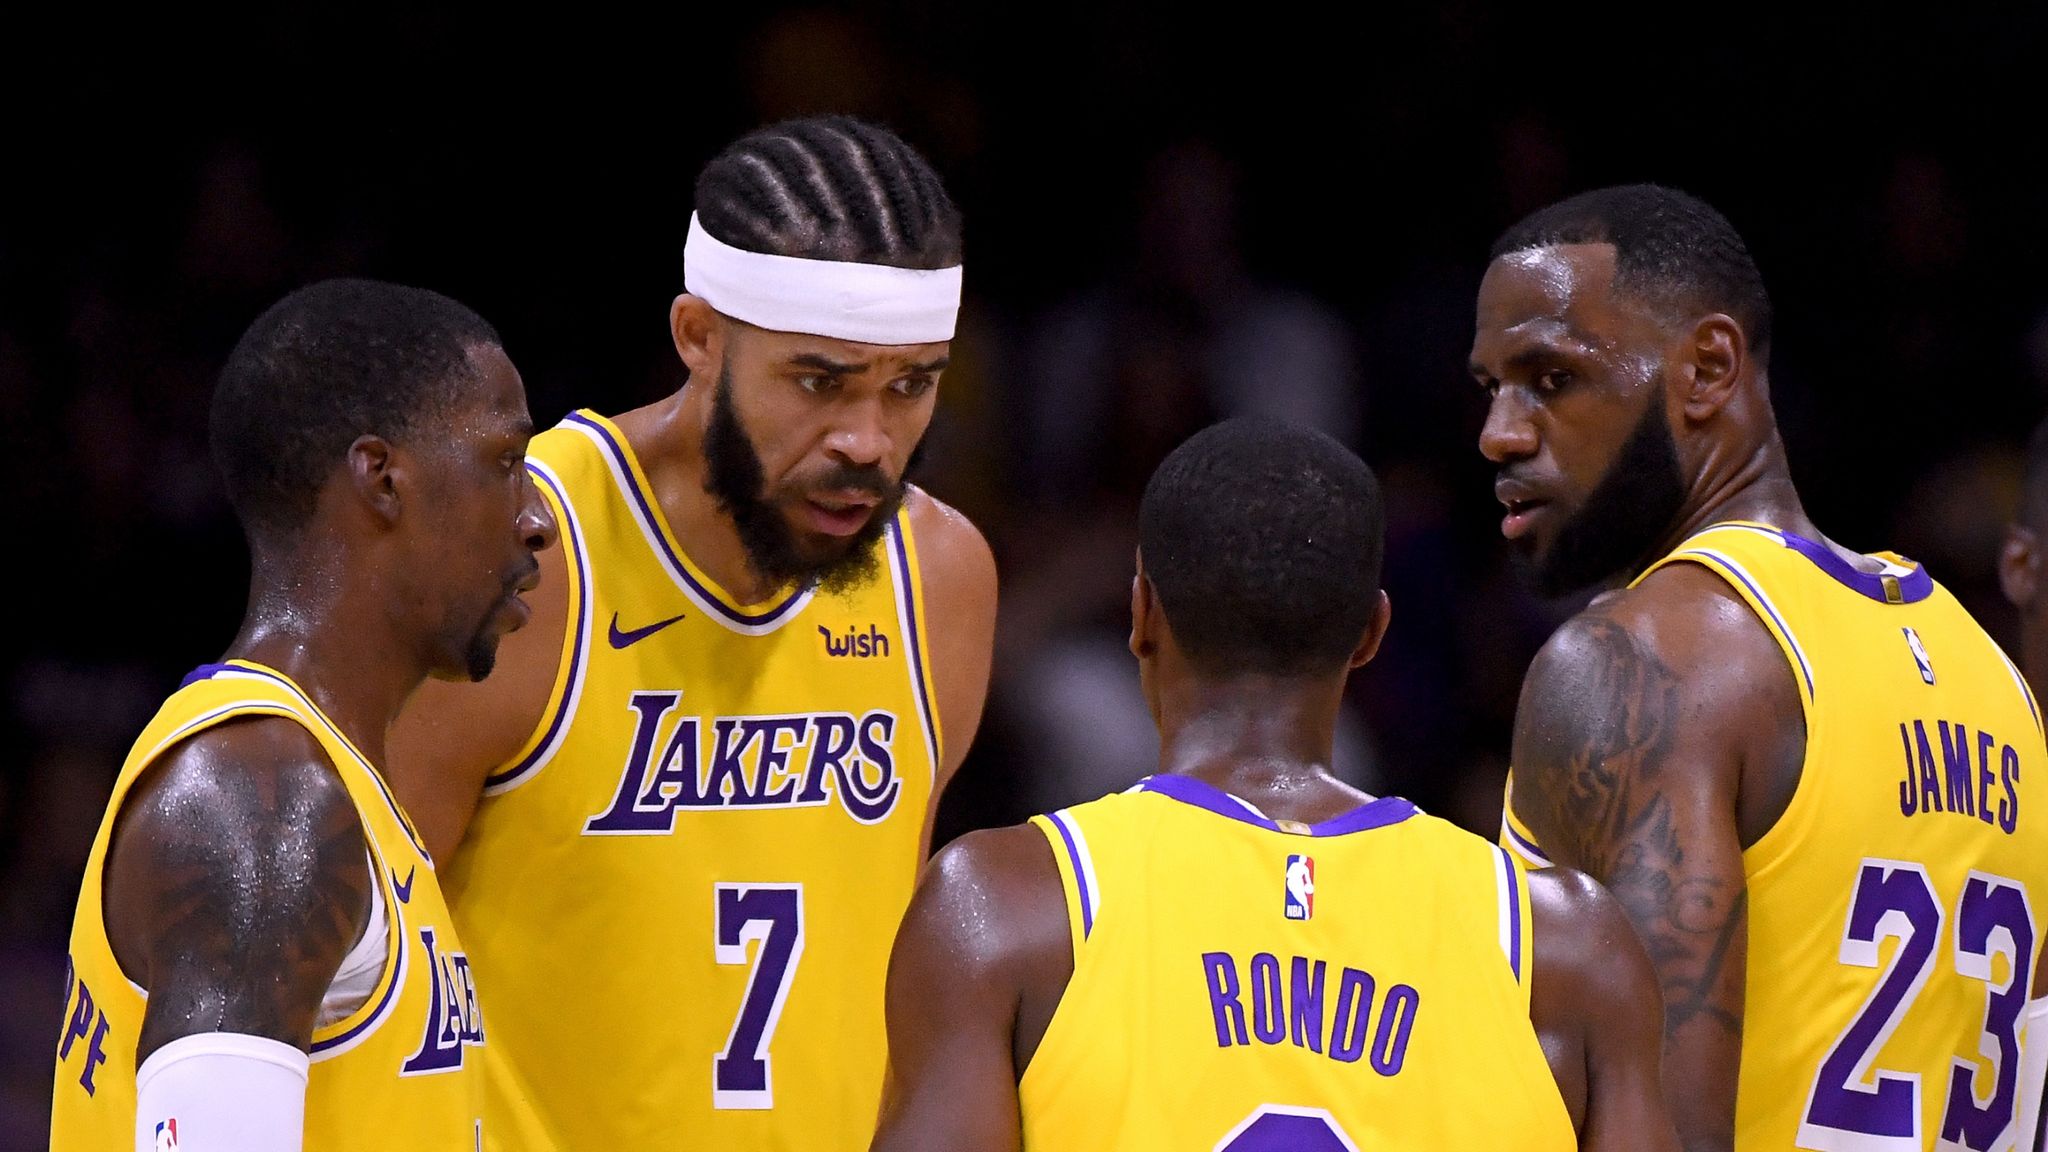 Rajon Rondo leads Lakers' reserves in Game 2 win over Heat - Los